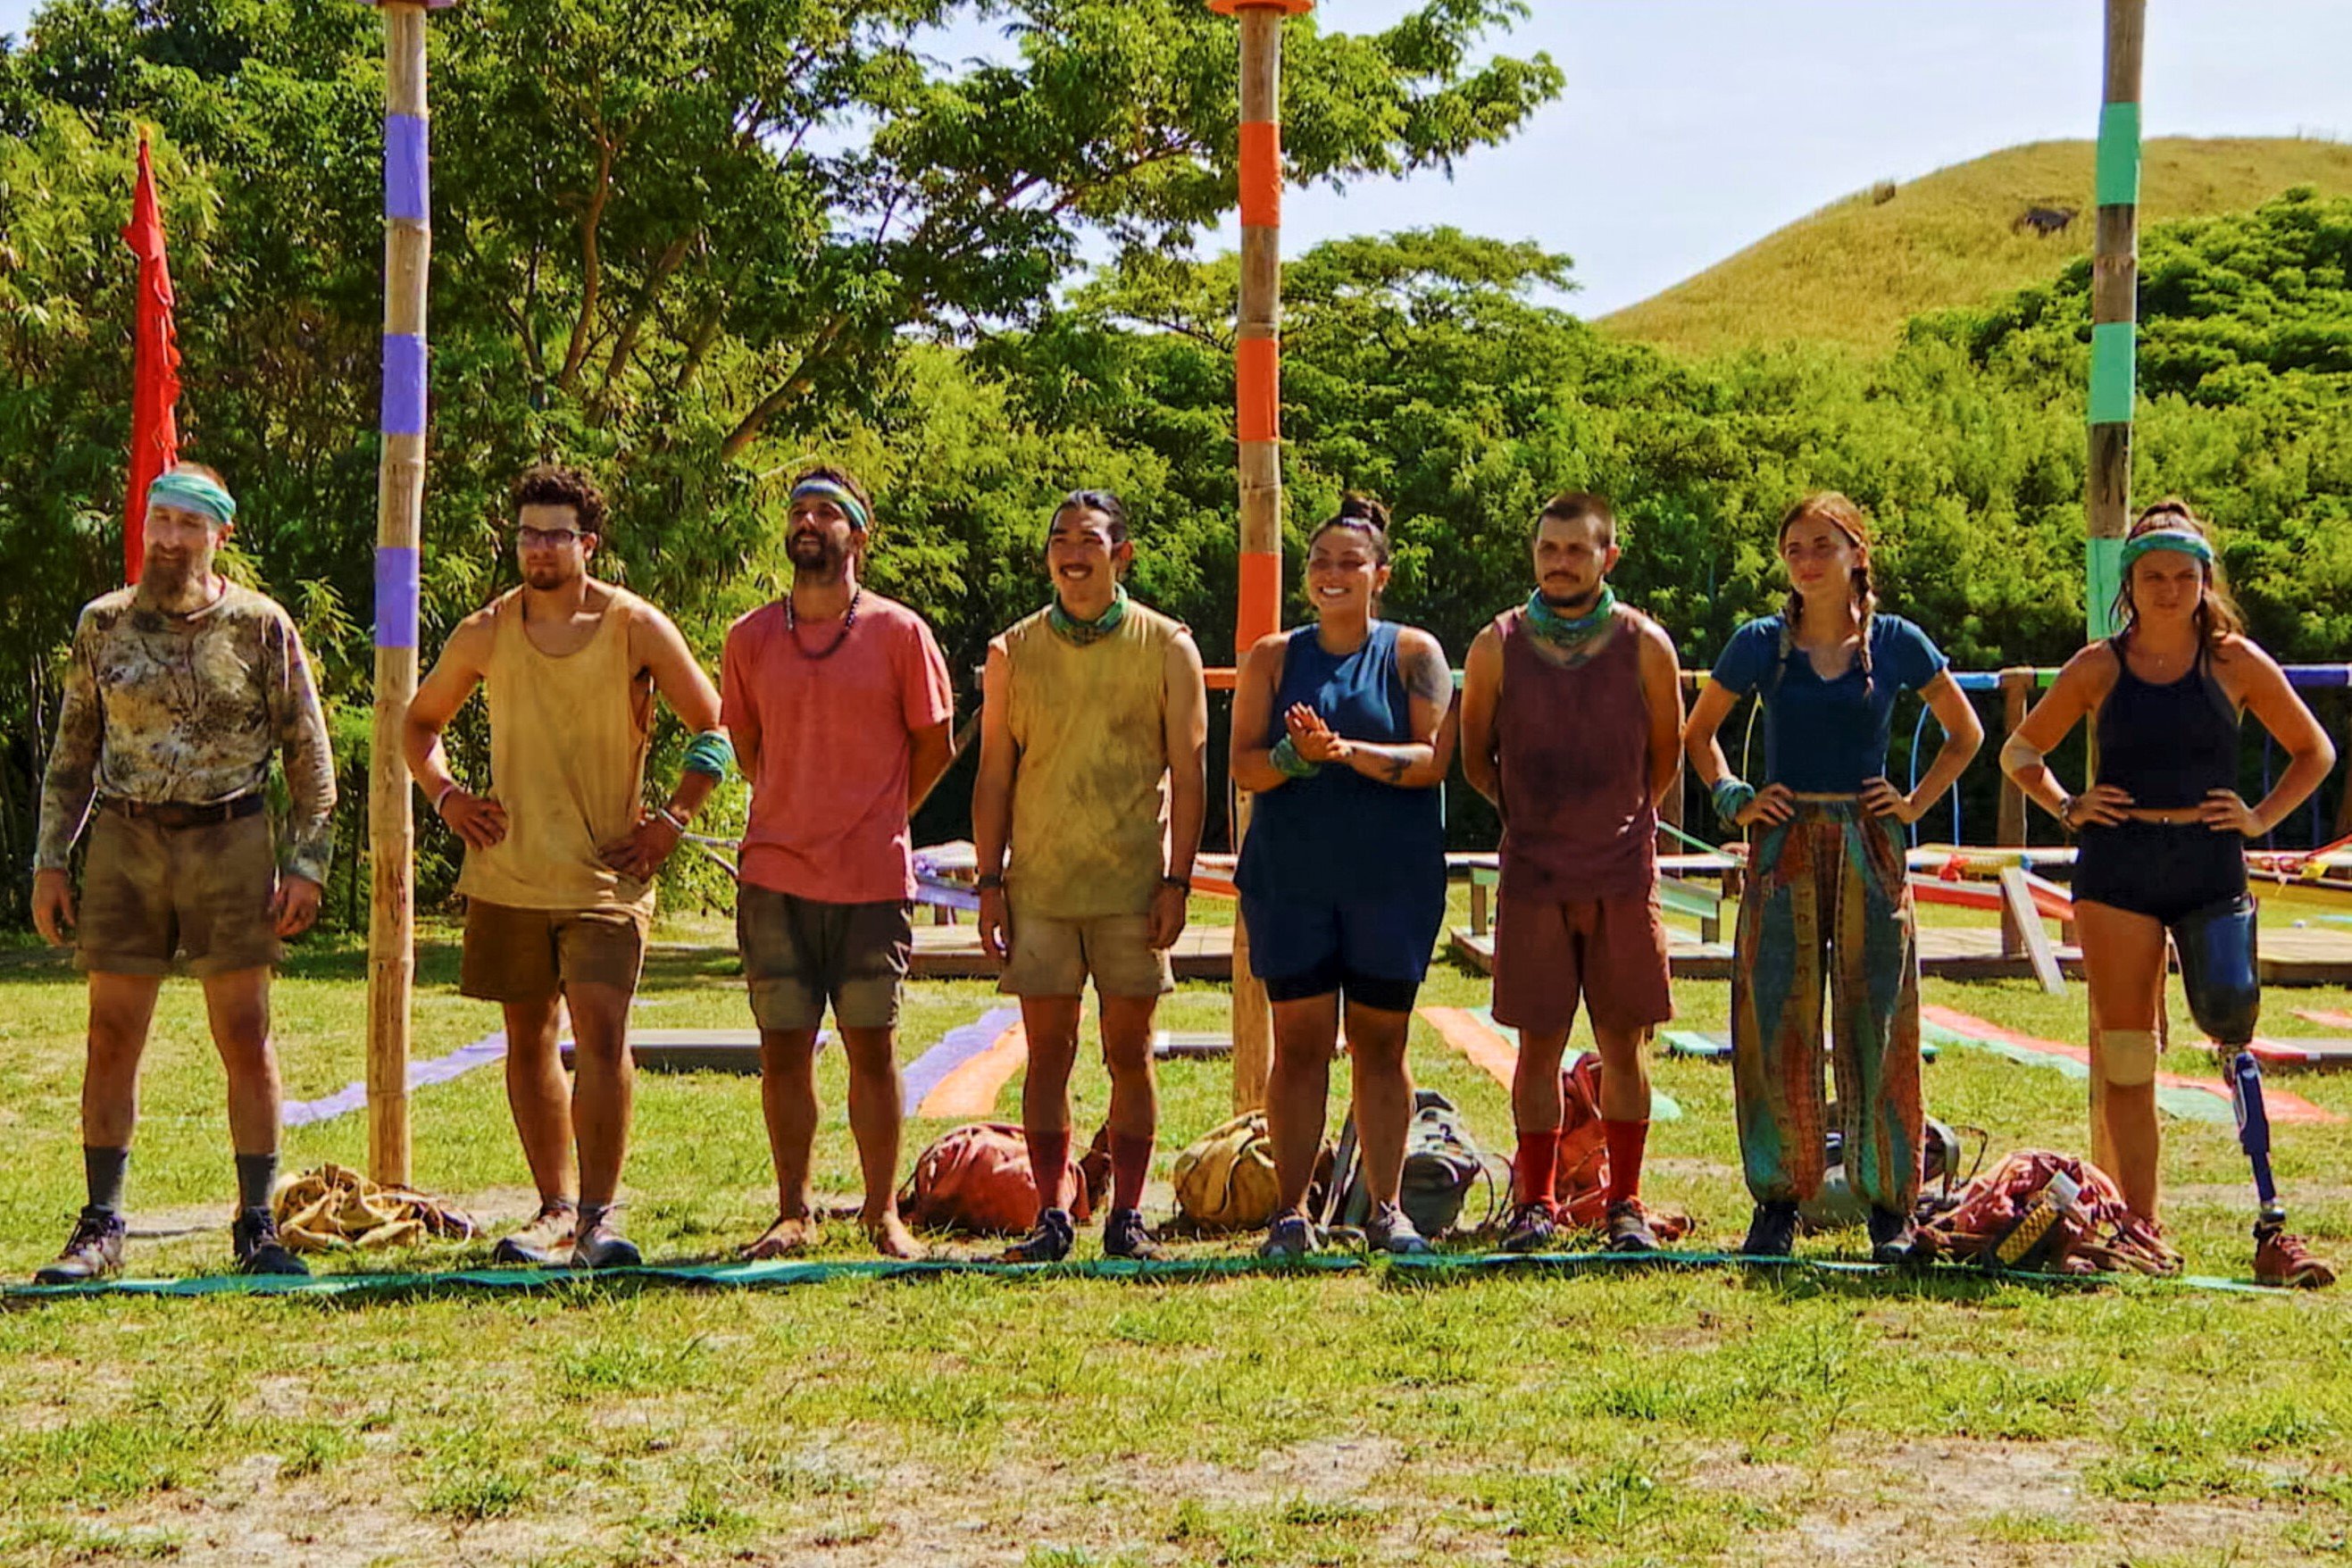 The final eight castaways in 'Survivor' Season 43 hear instructions for the Immunity Challenge in episode 10, which airs tonight, Nov. 23, on CBS.